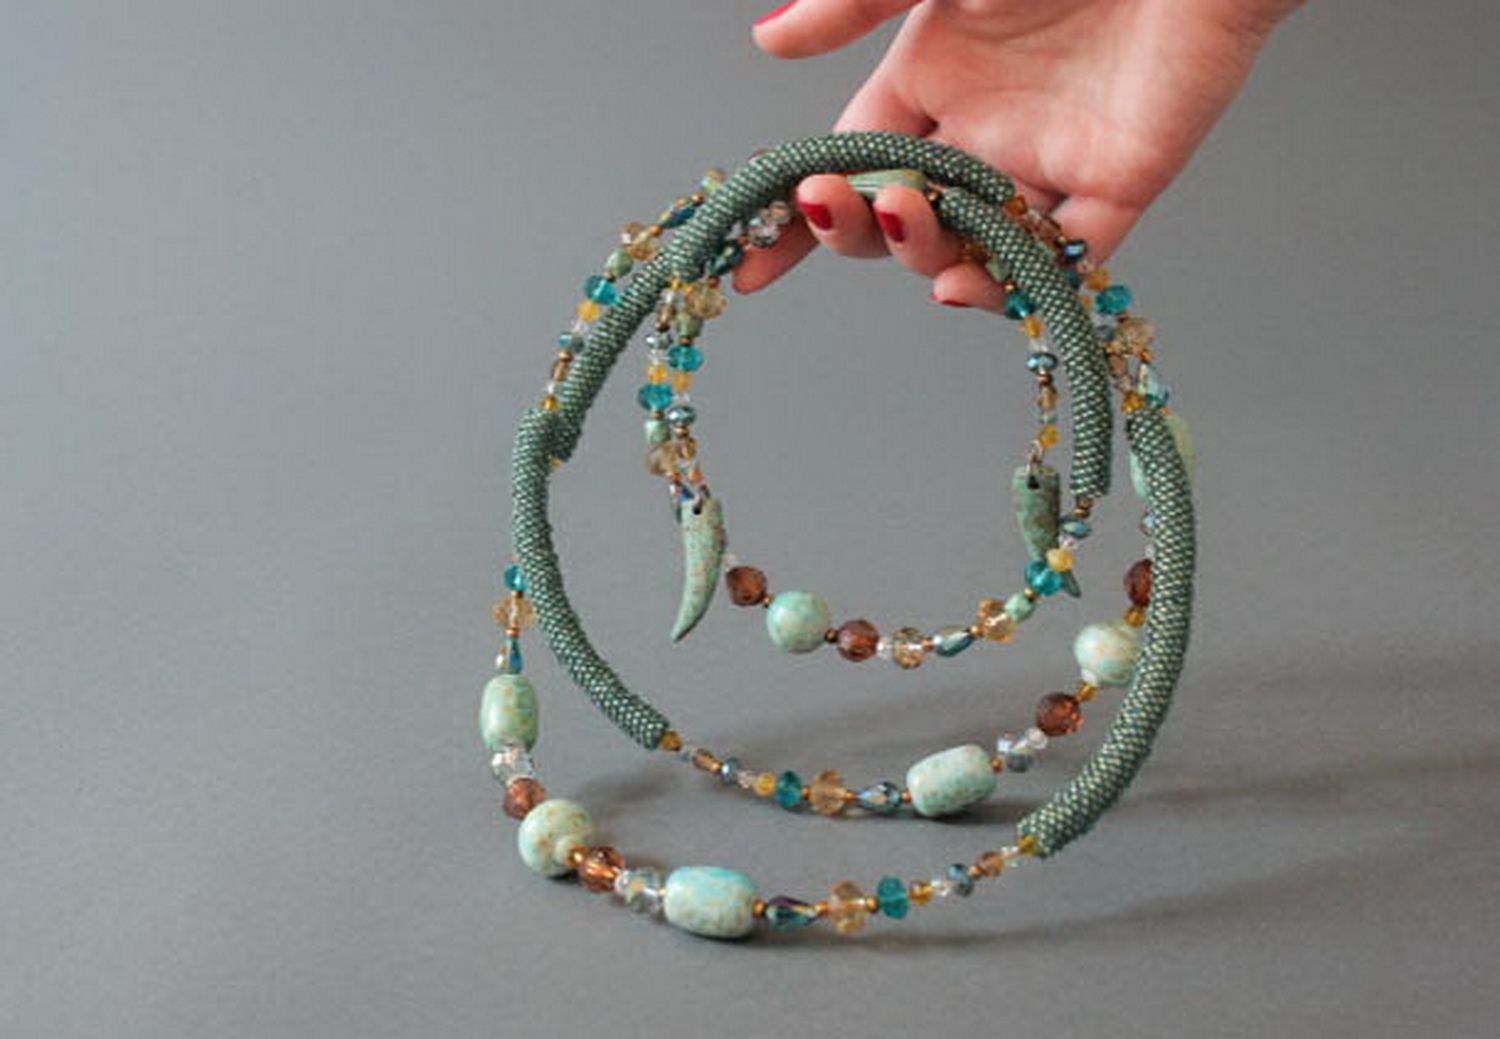 Plaited necklace made from beads with decorative stones photo 9